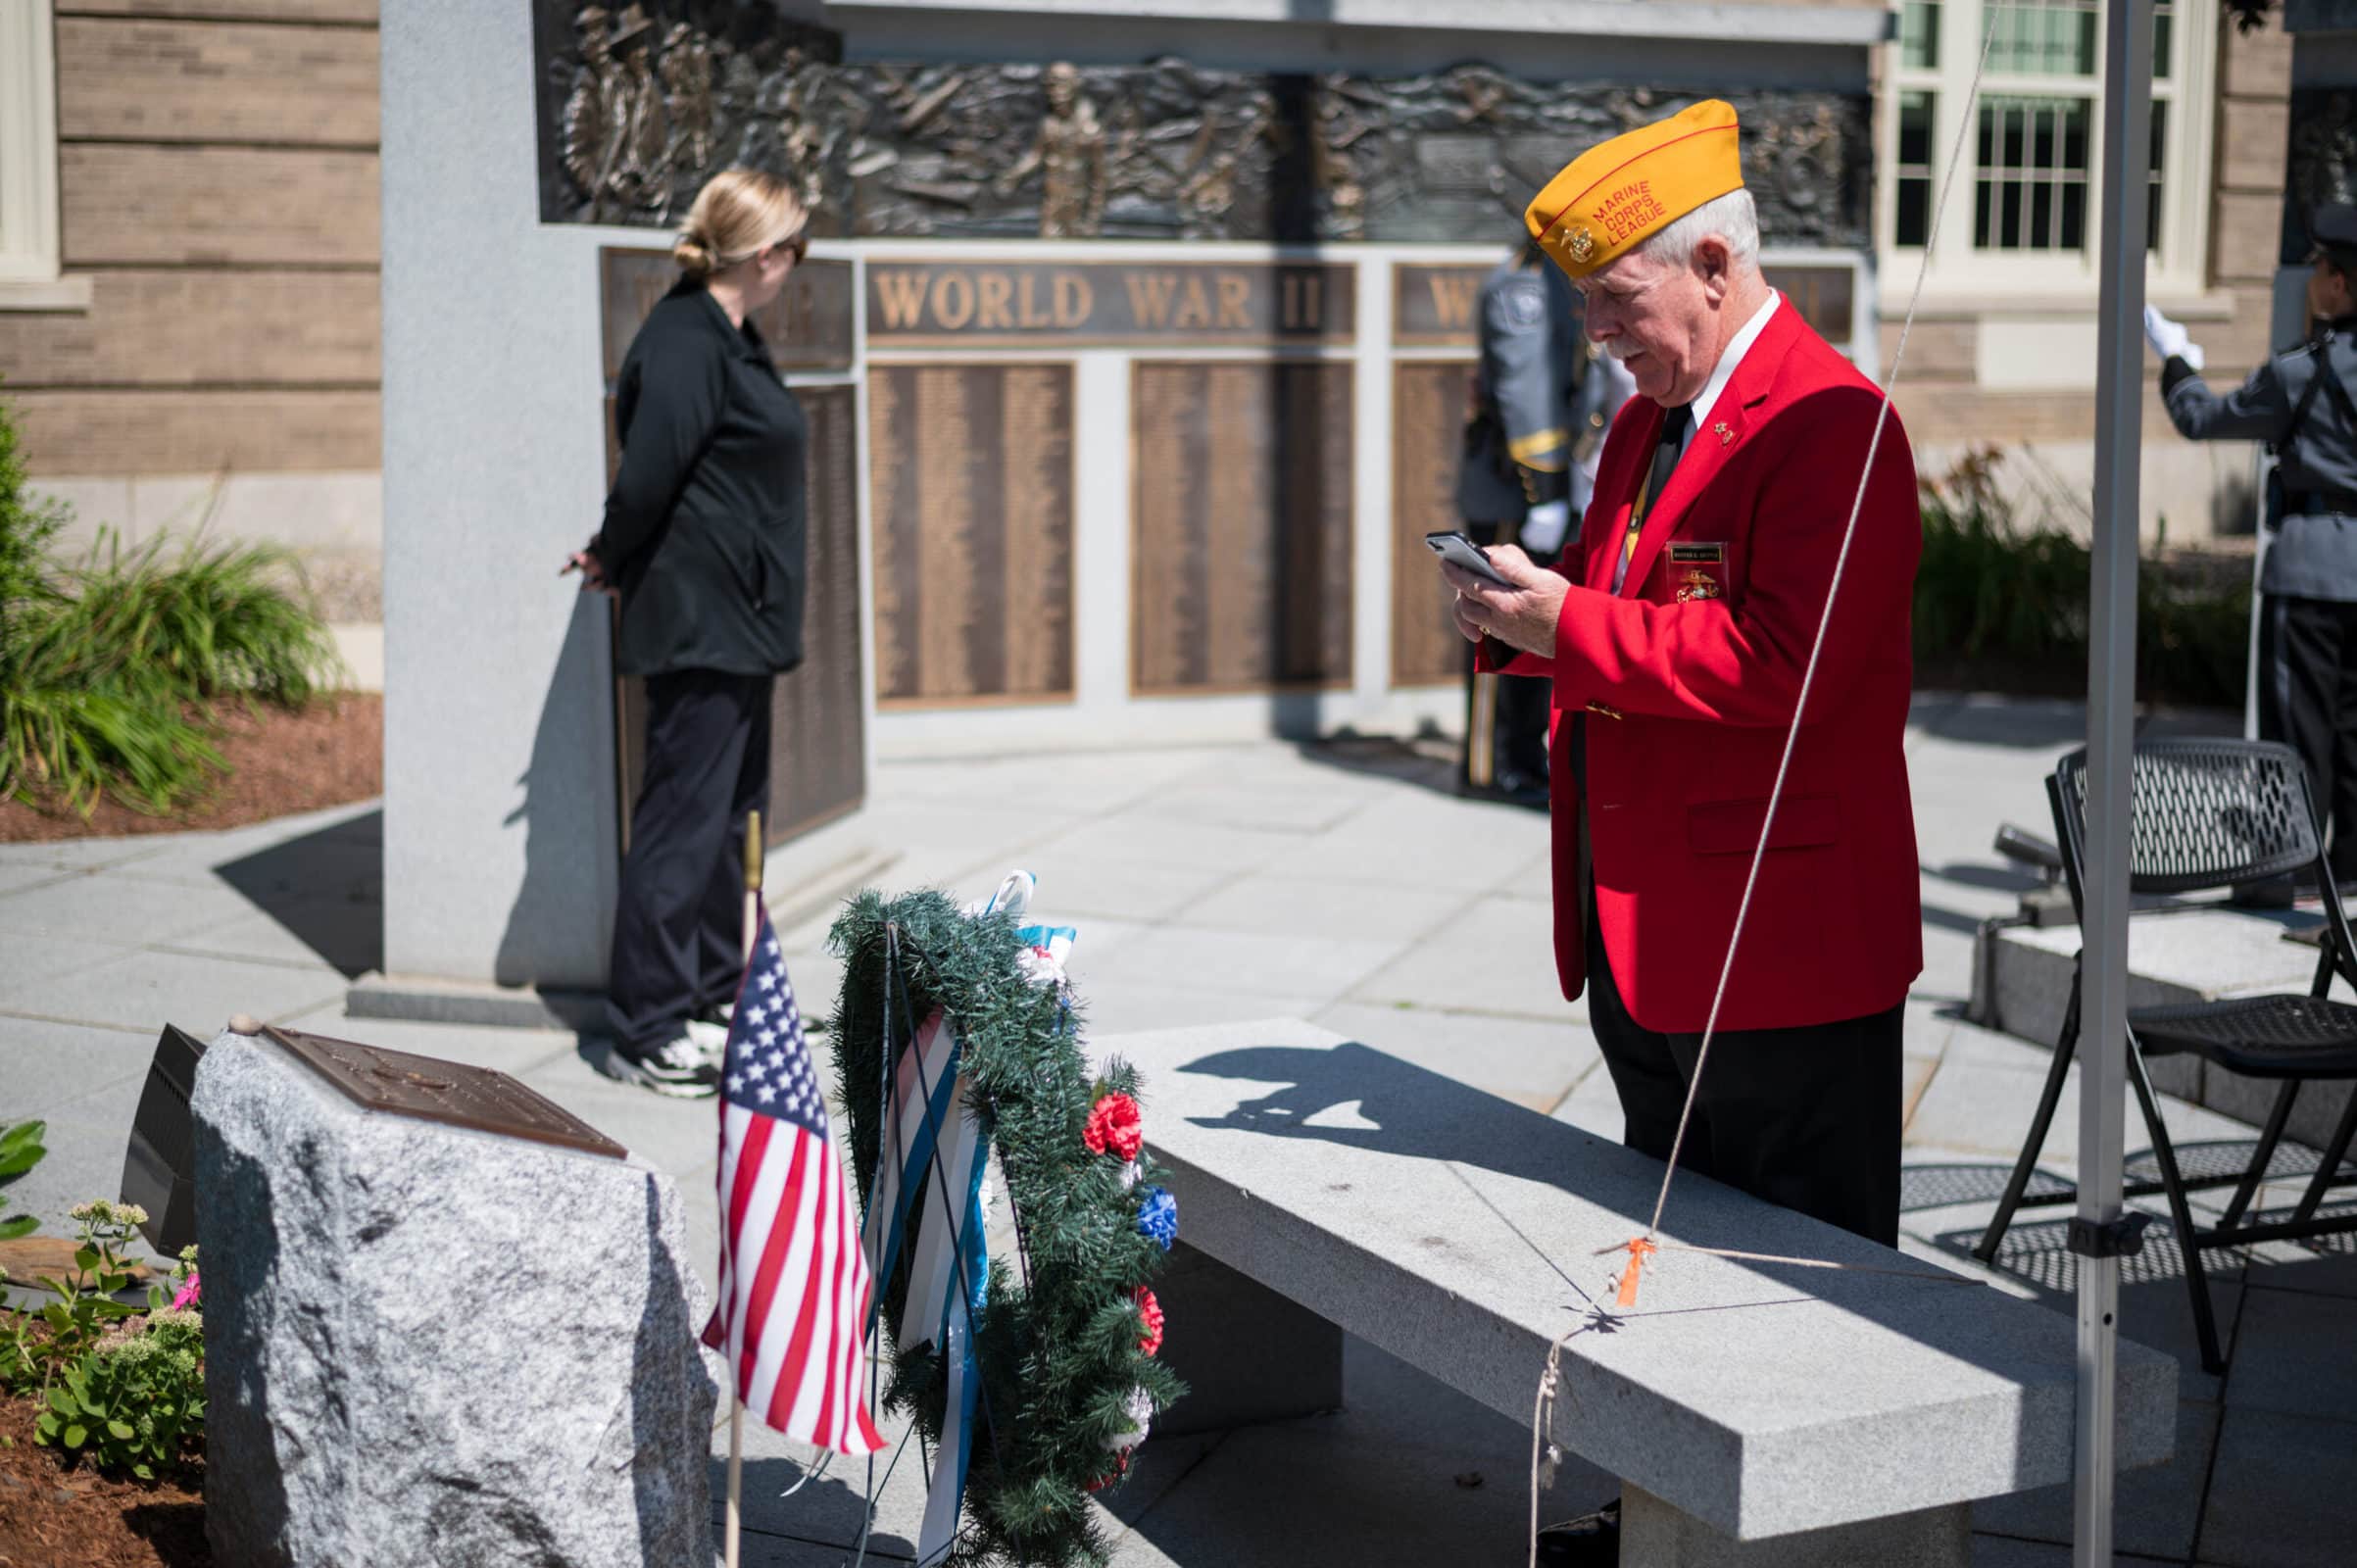 Warren Griffin, Junior Vice-Commandant of the Marine Corps League, takes a picture of the plaque and pedestal that now honor Michael Haskell outside Westborough’s Forbes Municipal Building. (Photo/Jesse Kucewicz)